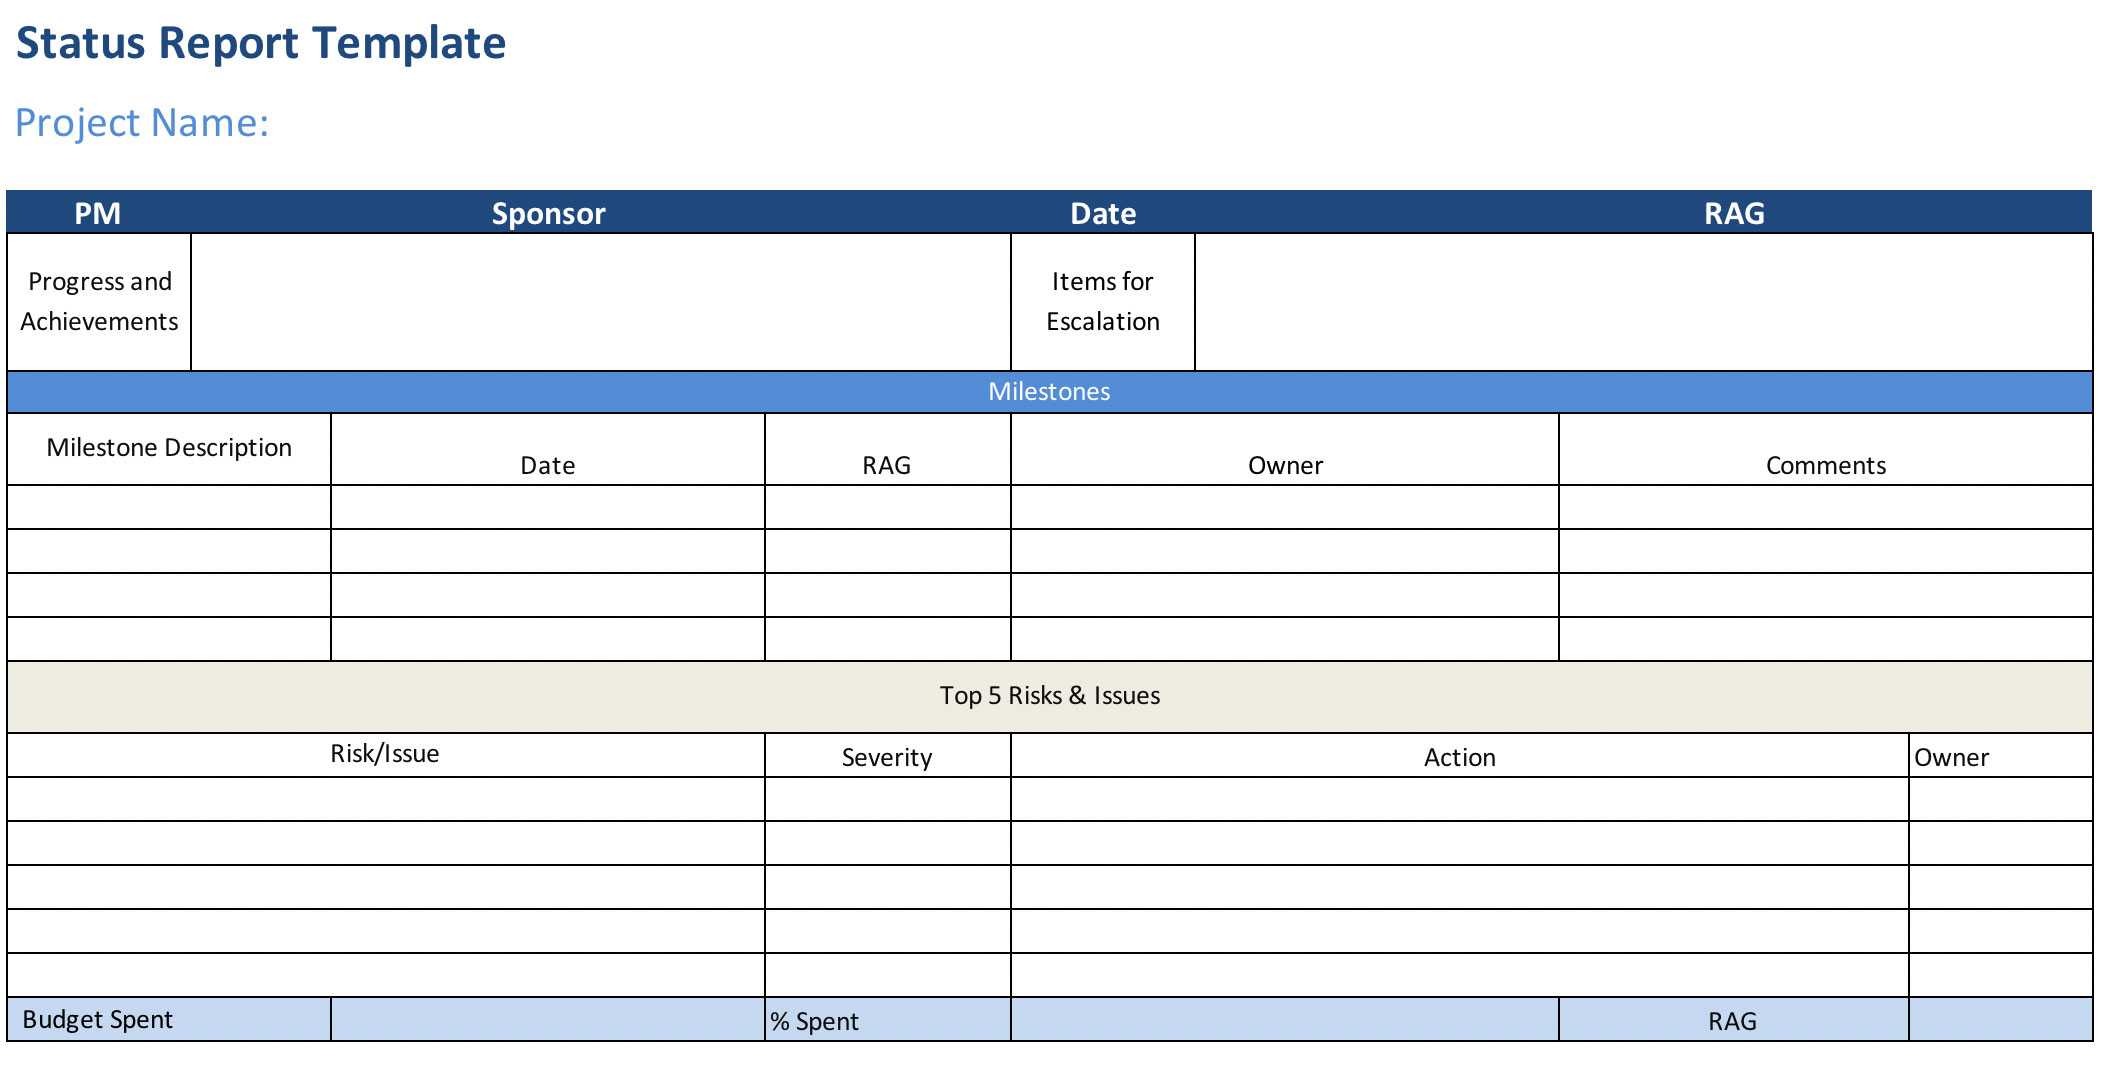 Project Status Report (Free Excel Template) – Projectmanager Inside Project Status Report Email Template